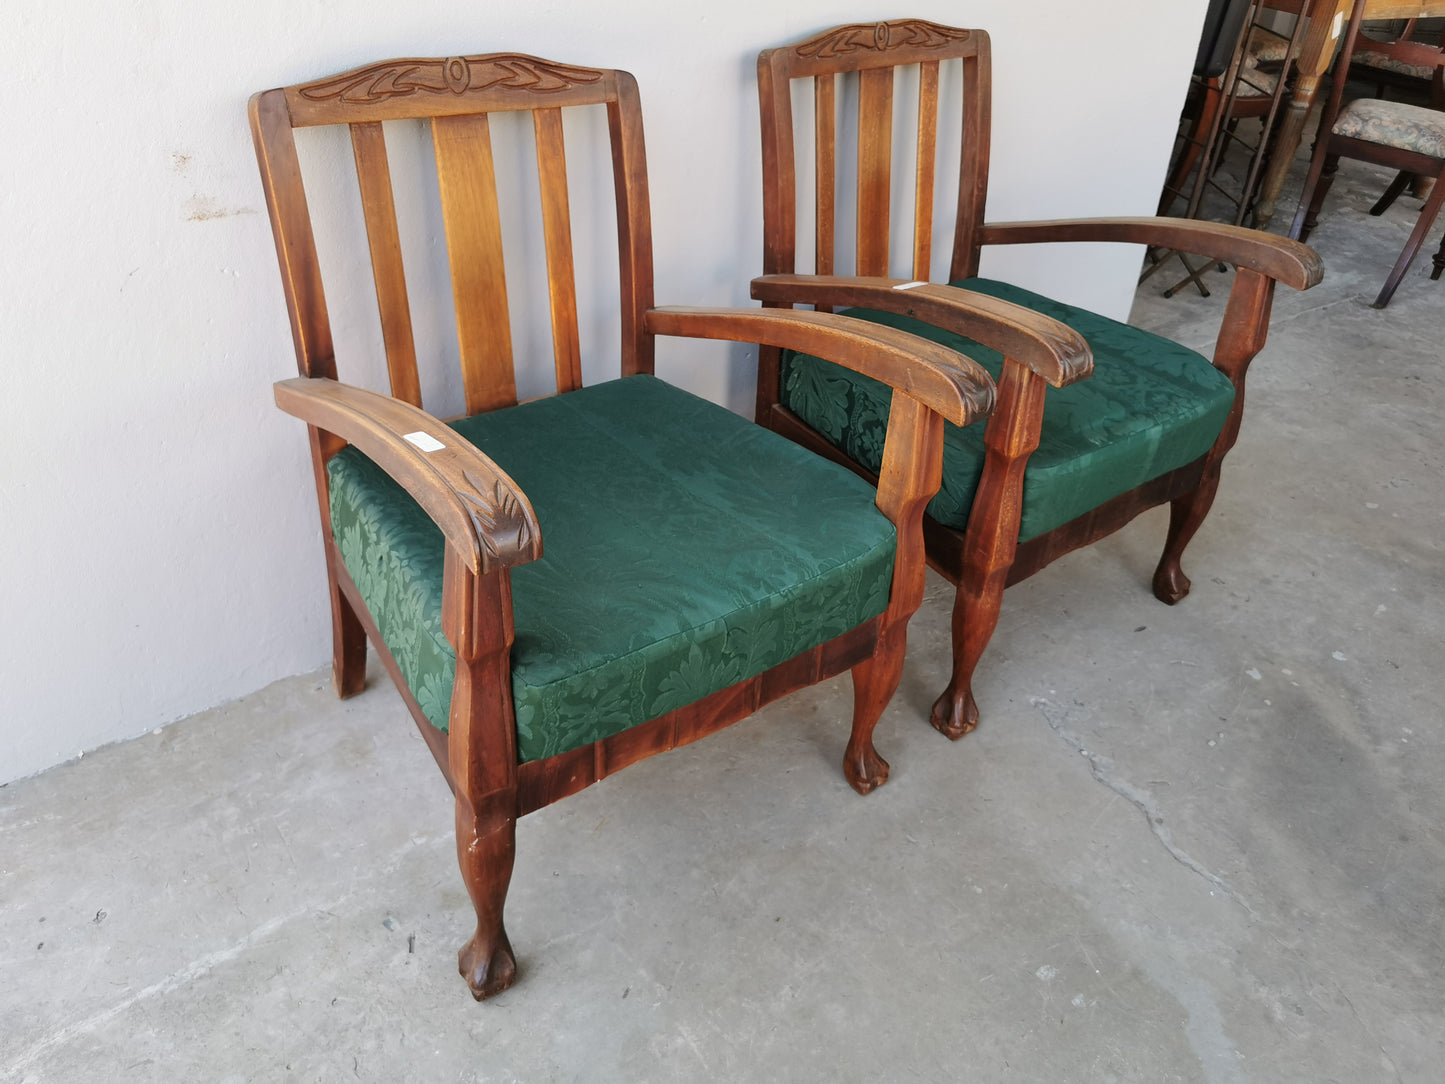 Pair of wooden arm chairs